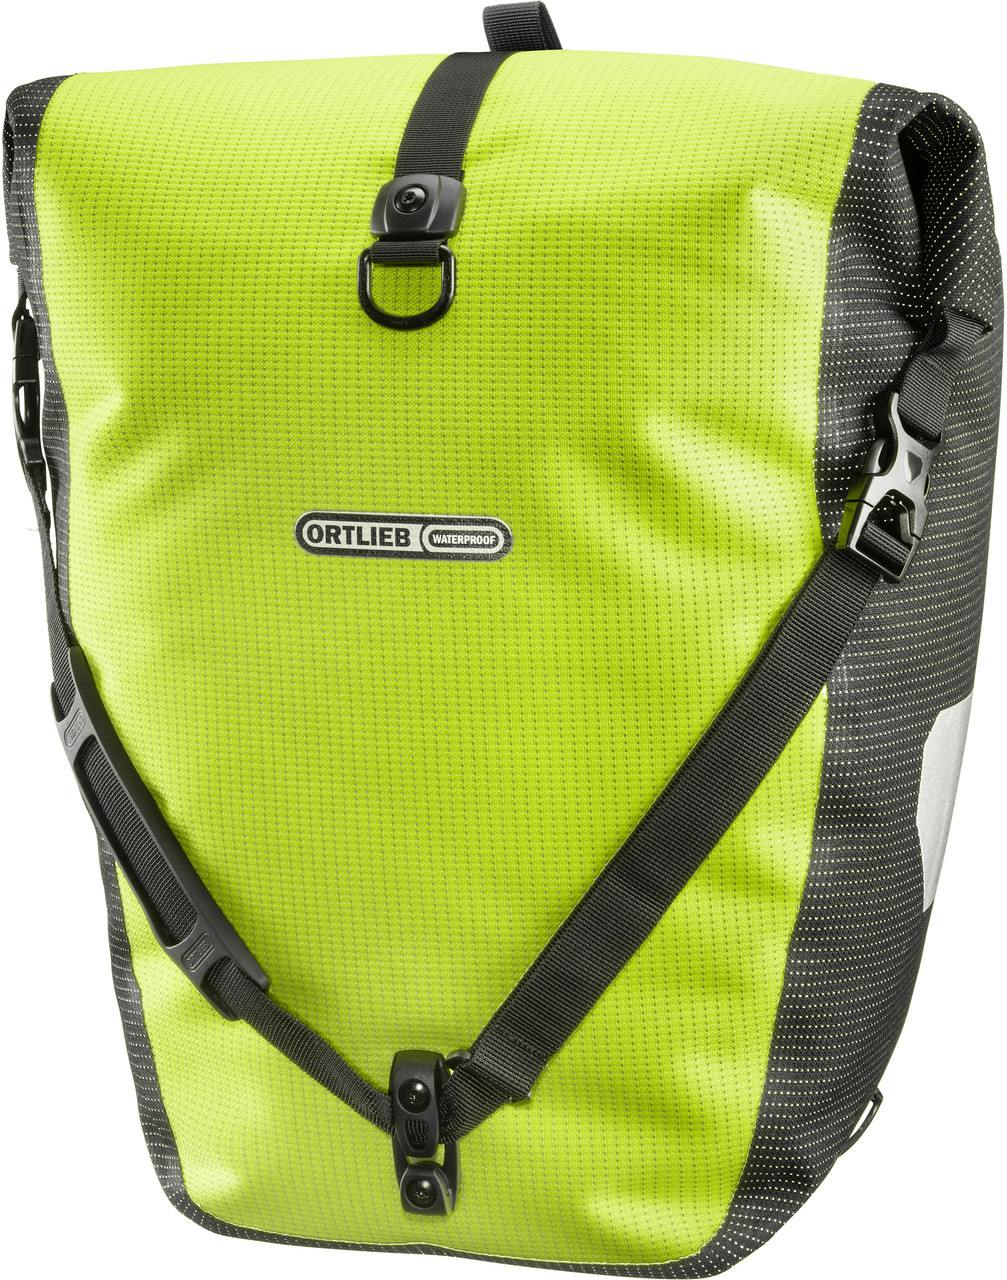 Back-Roller High-Visibility Pannier Neon Yellow/Black Reflect